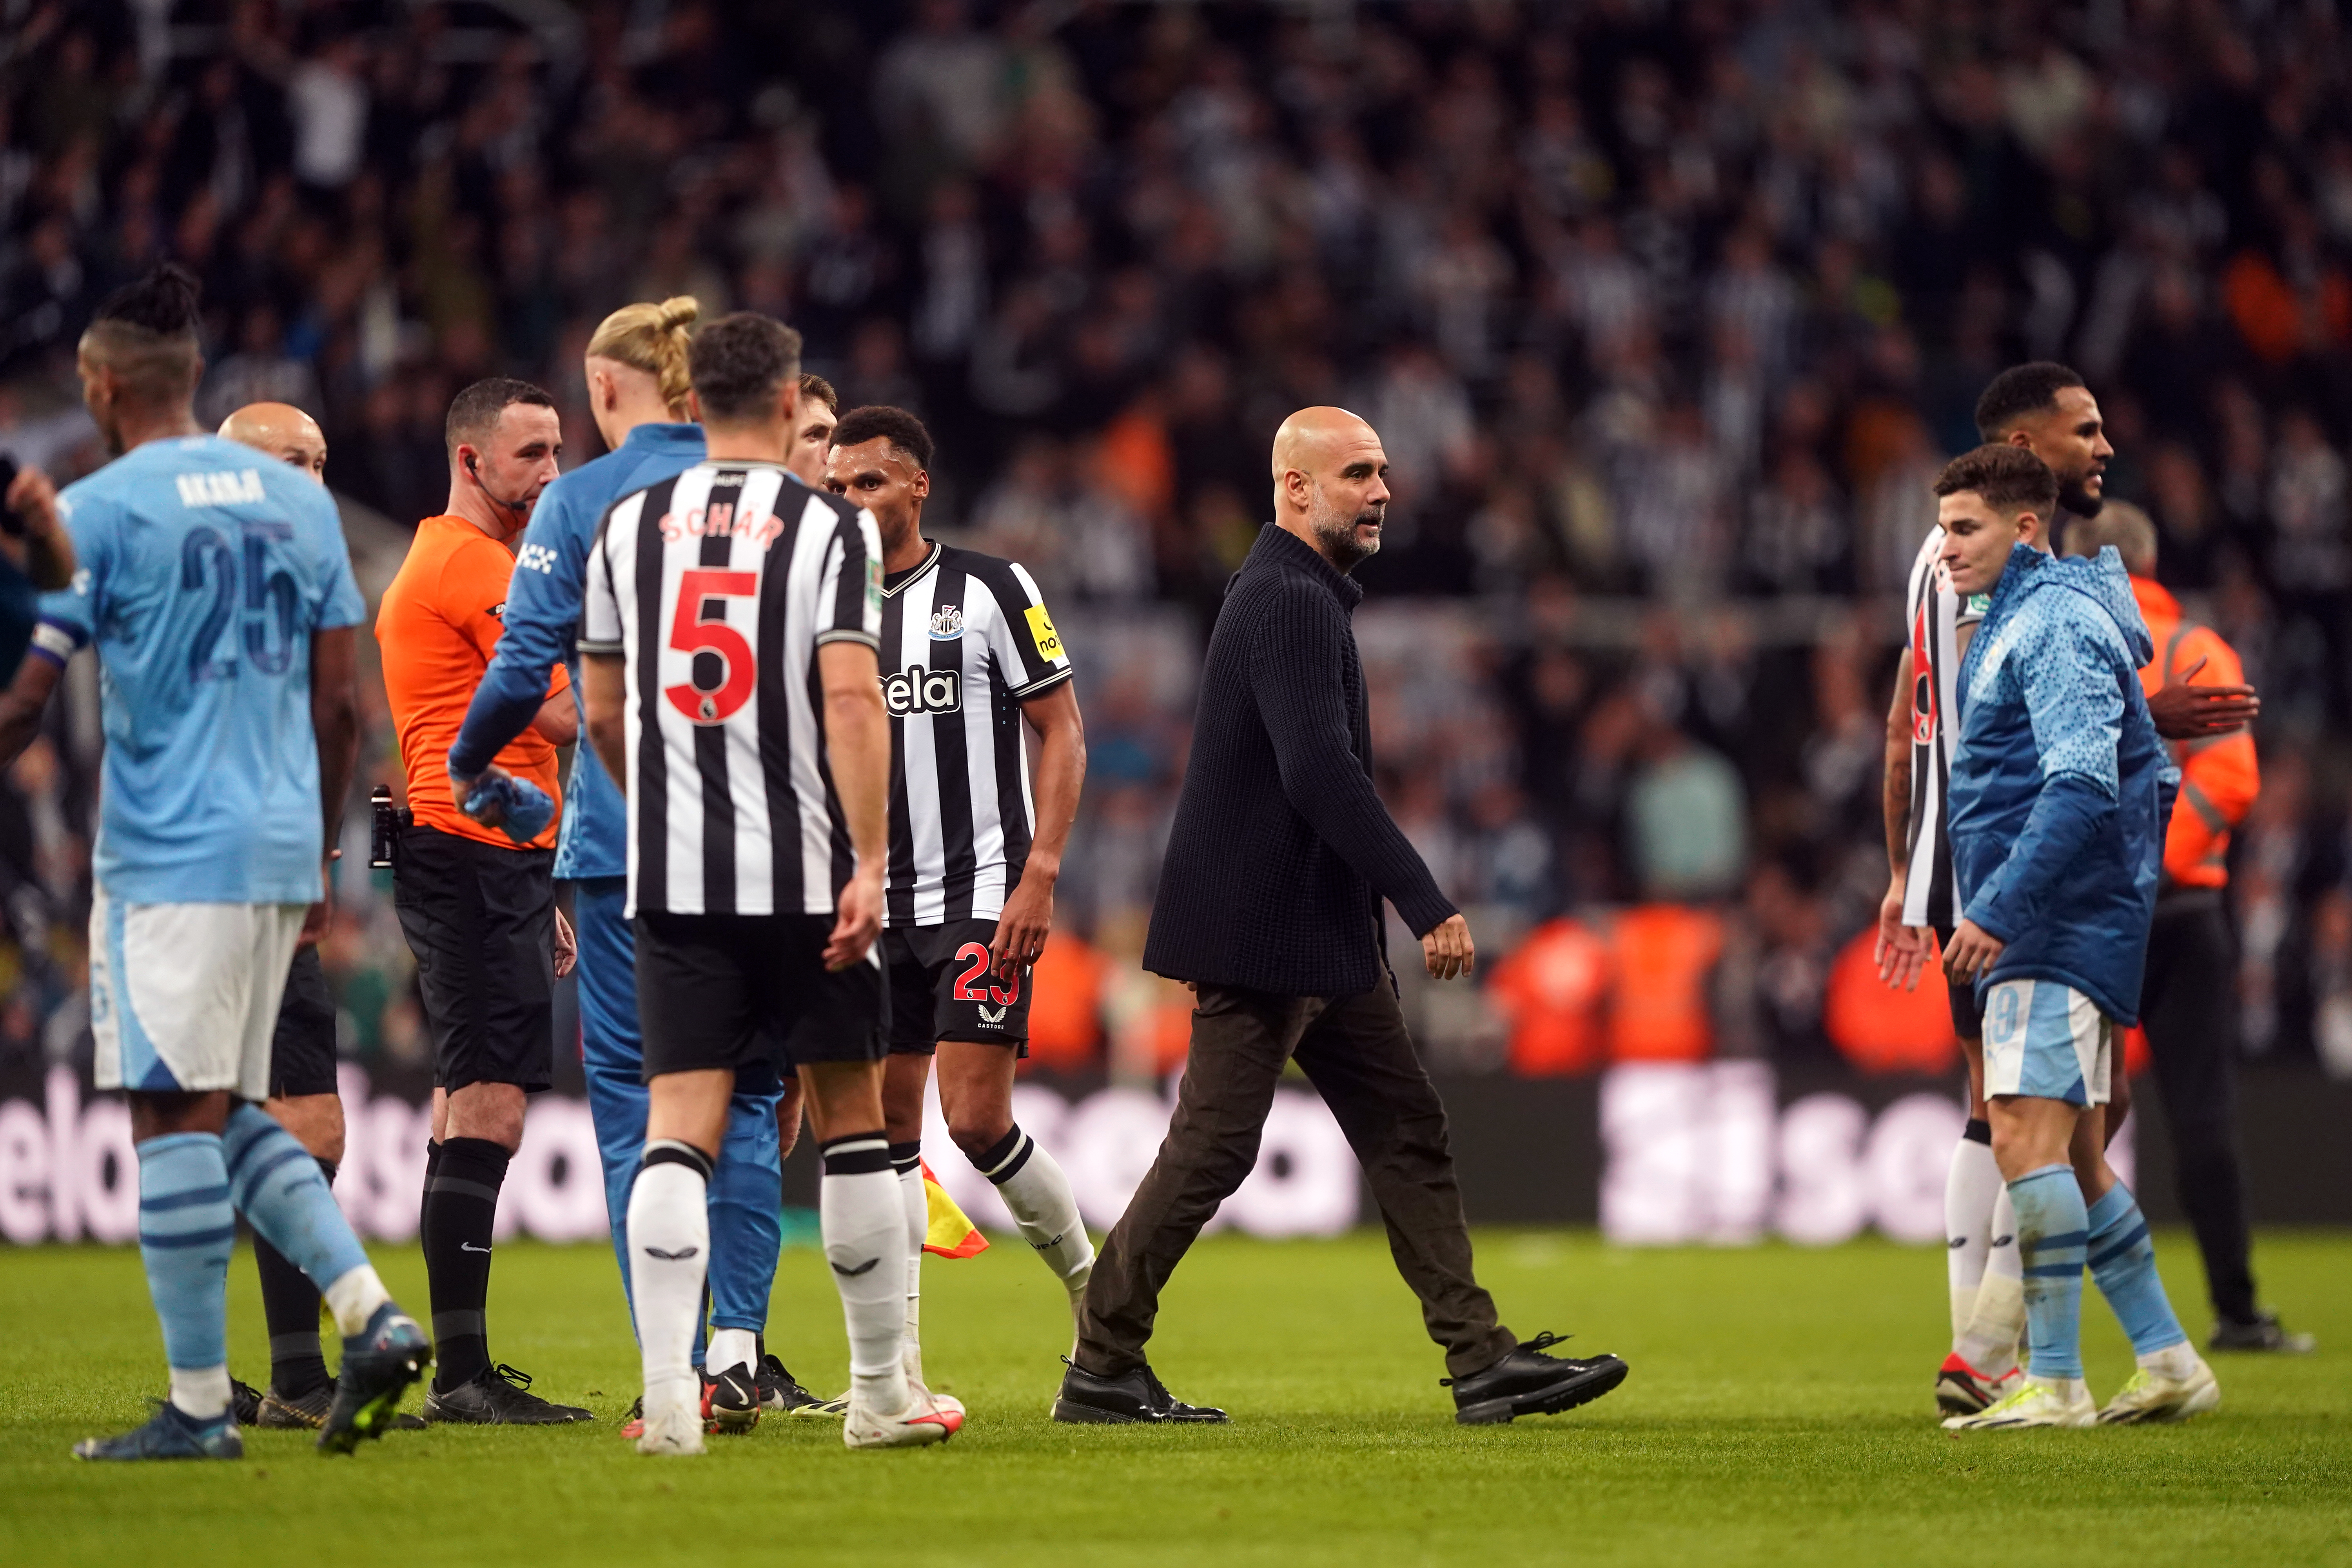 Manchester City manager Pep Guardiola after the Carabao Cup third round match at St James’ Park